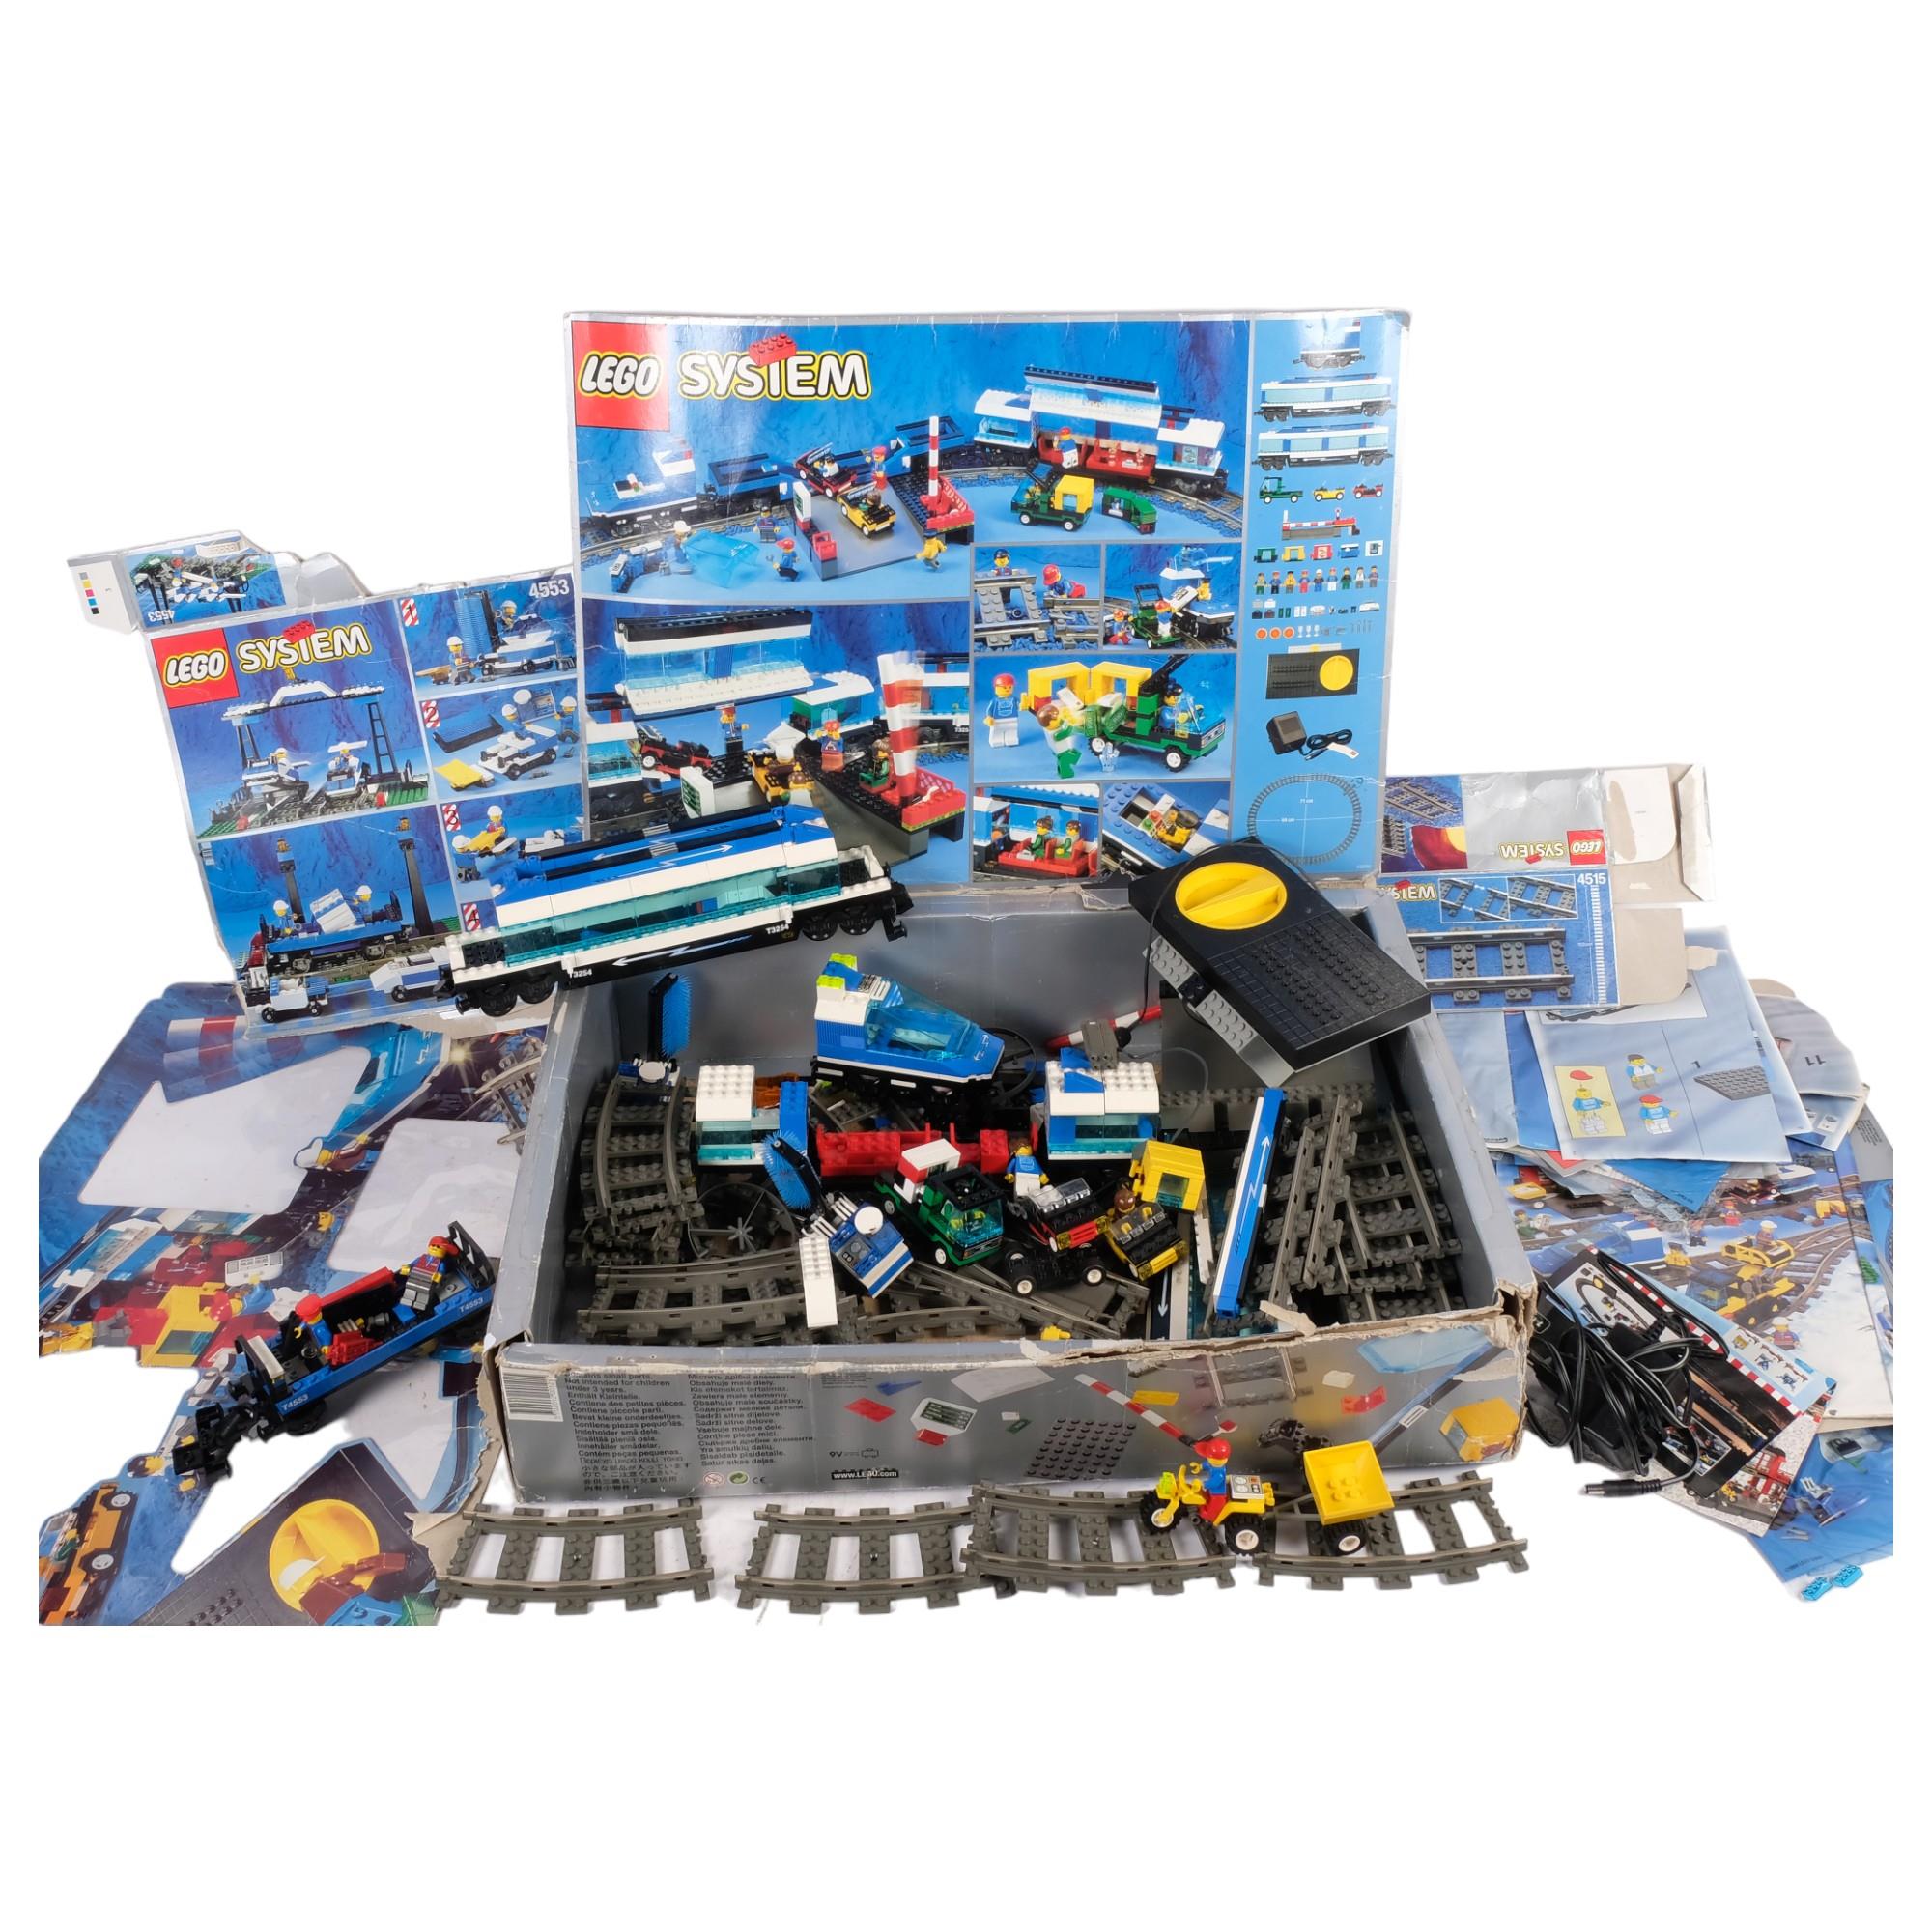 A LEGO System 4561 Railway Express 9 volt train, in original box with associated instruction manuals